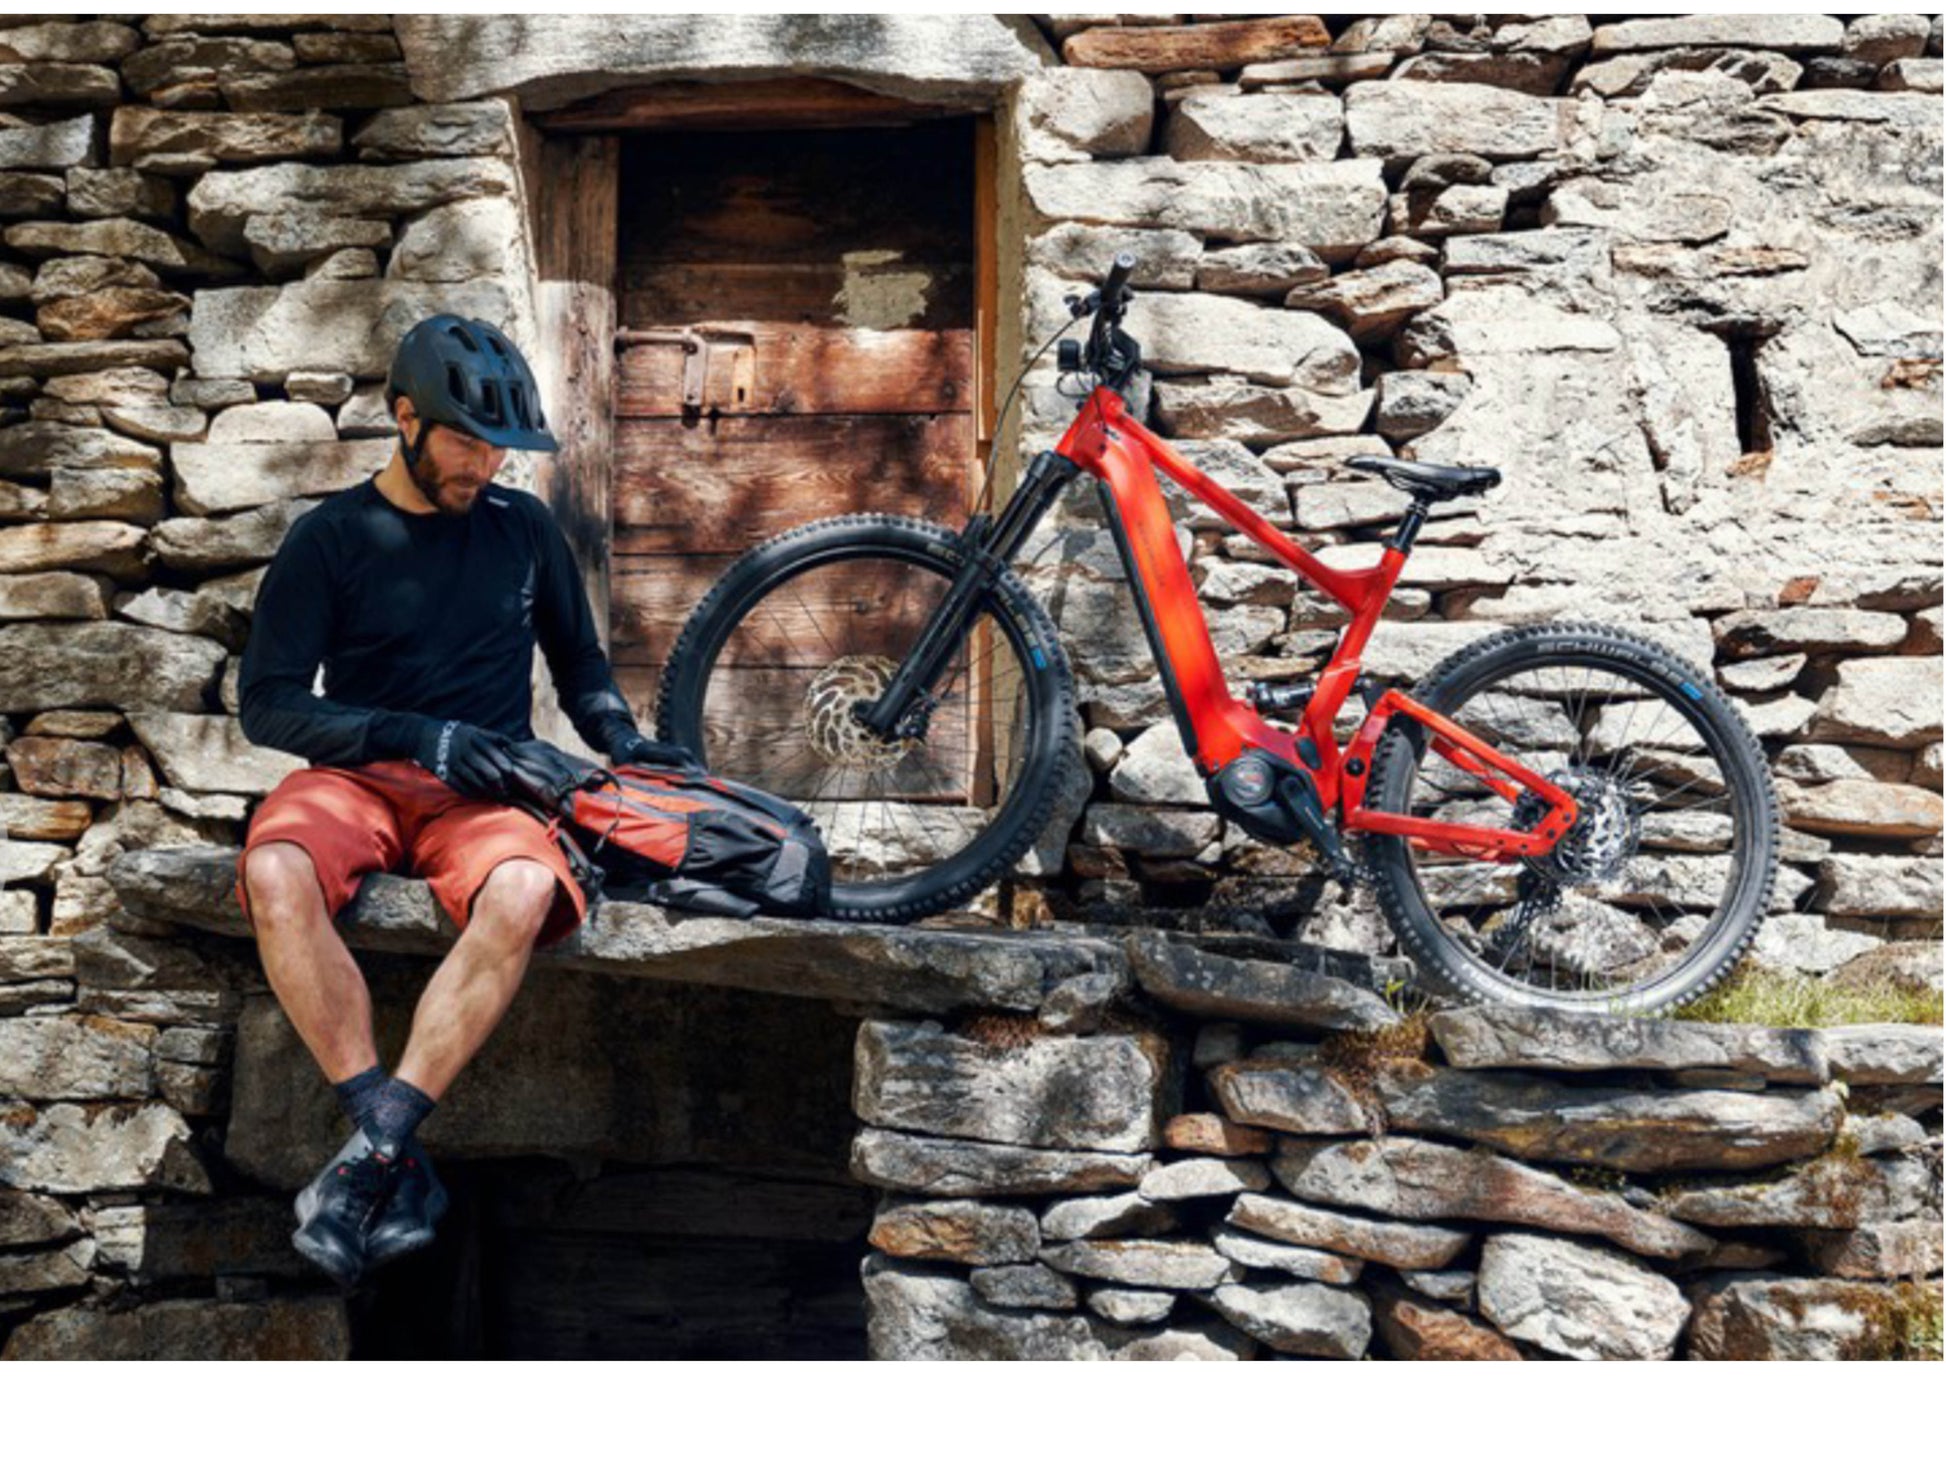 Riese and Muller Delite Mountain Touring eMTB full suspension man sitting with bike old stone house